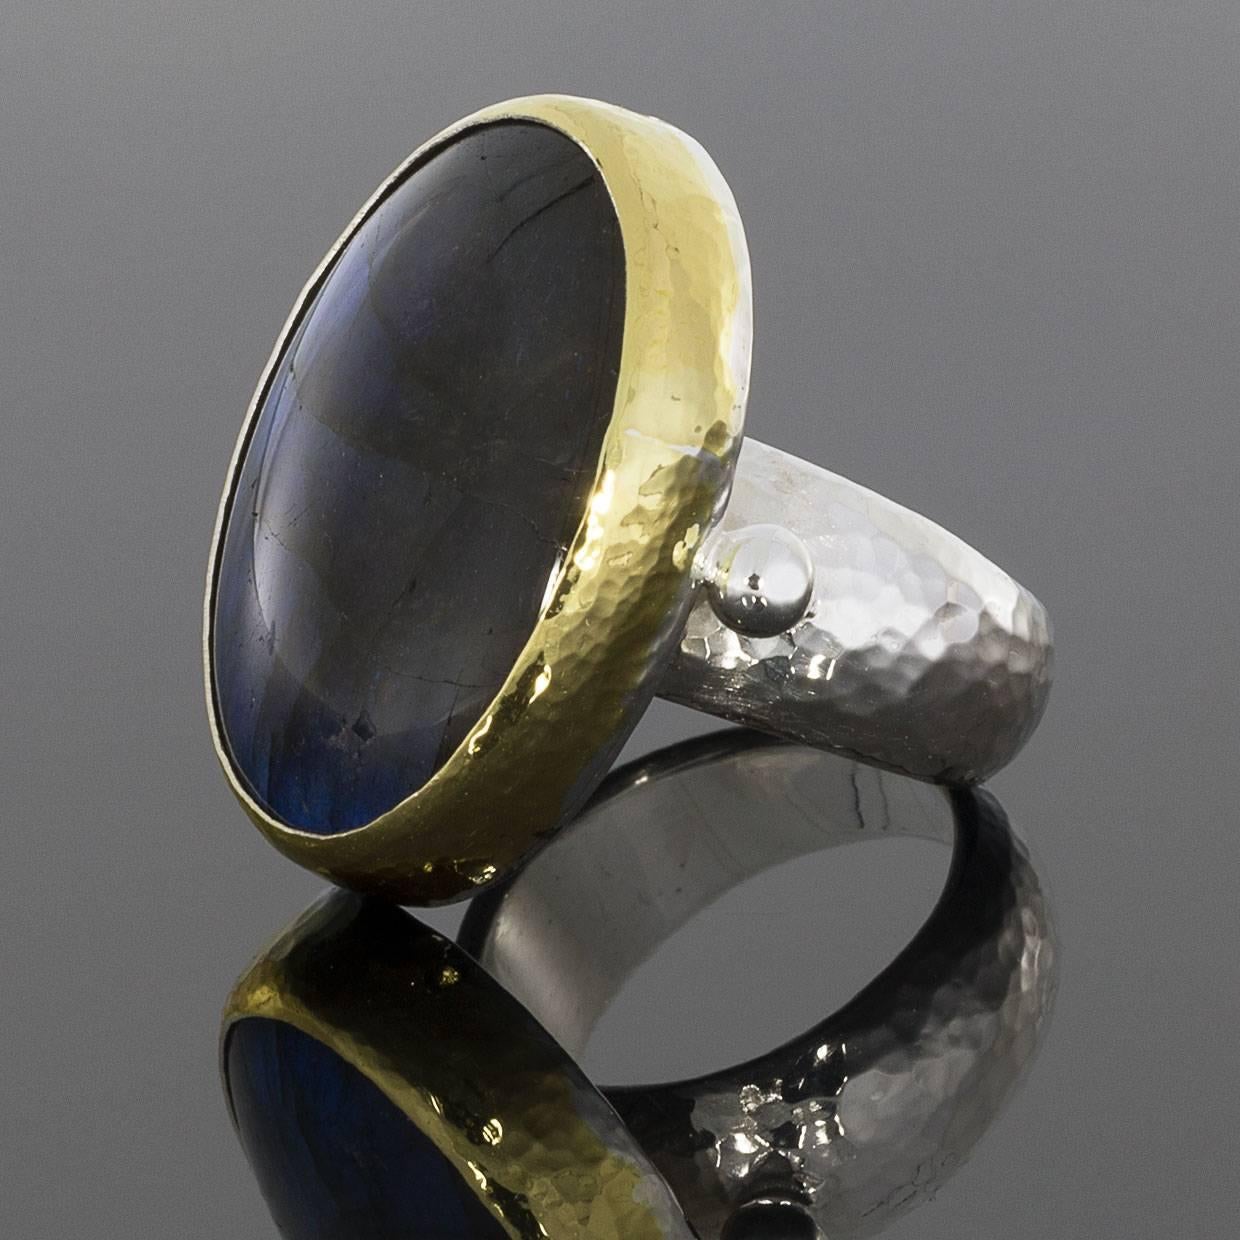 Gurhan is a Turkish designer who was inspired by the look of pure gold to create his own collection. This ring is from the Galapagos collection, which features bezel set colored gemstones. This captivating labradorite ring would be a great addition